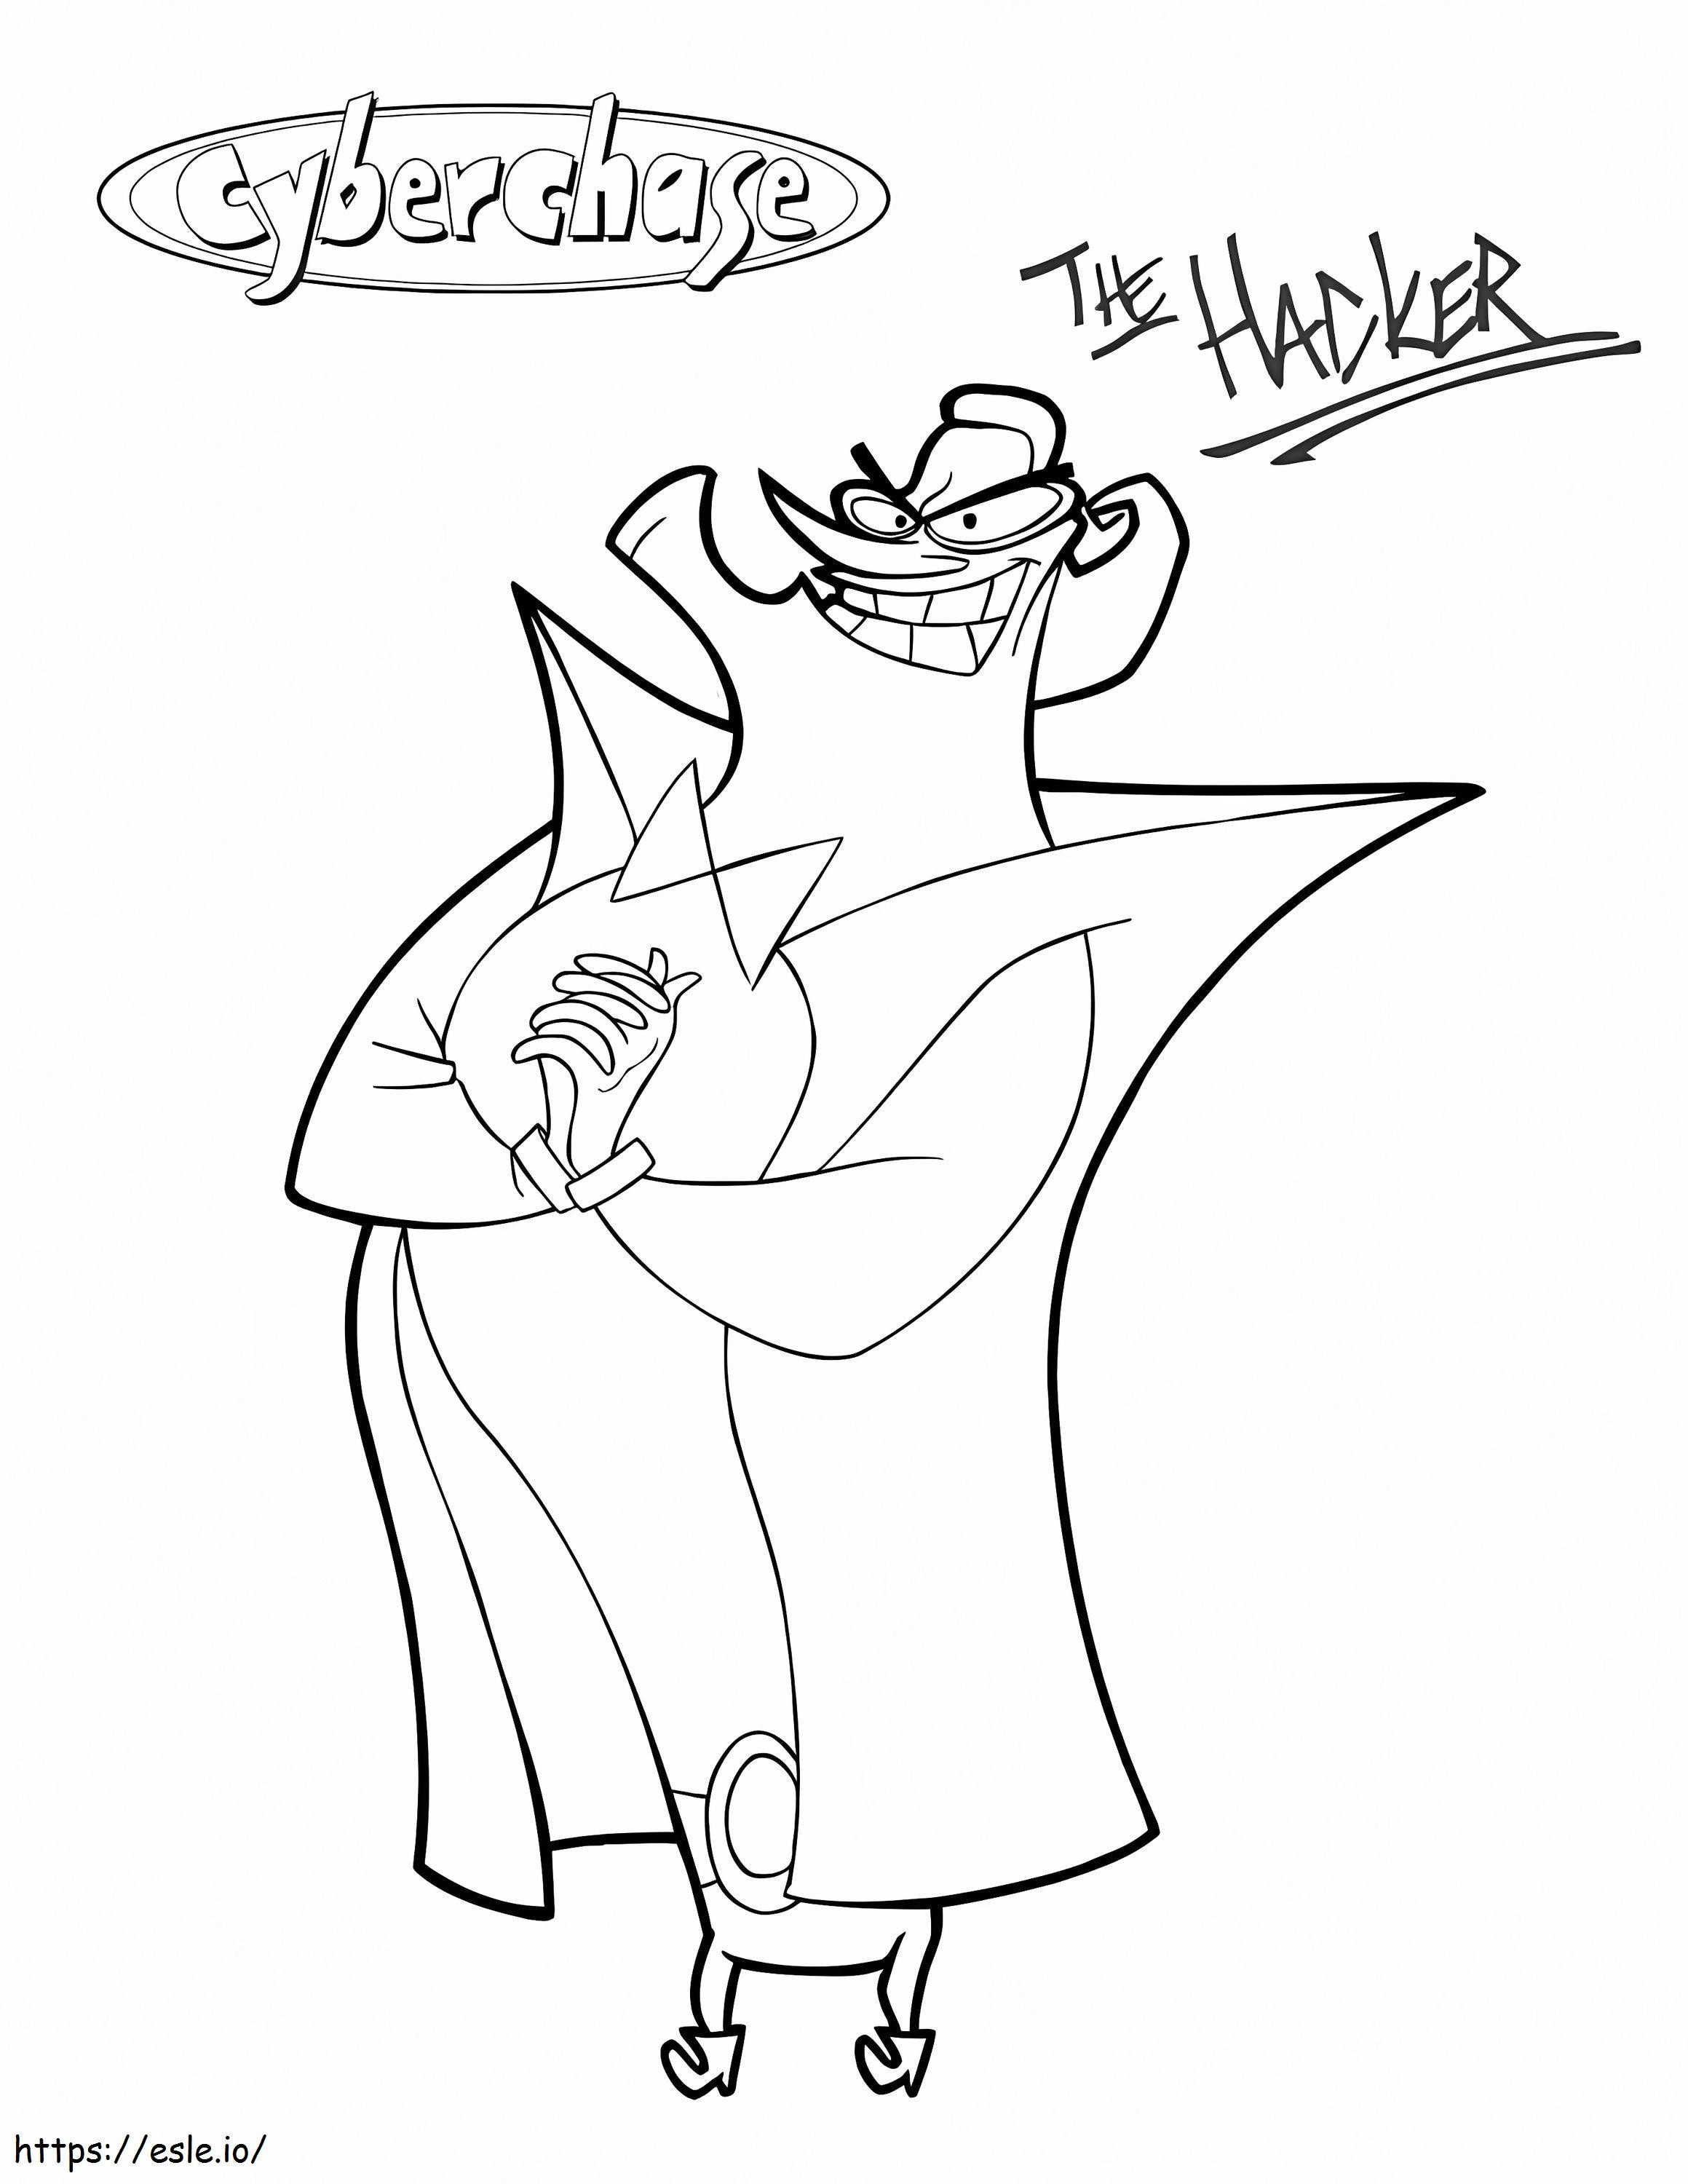 Cyberchase Hacker coloring page